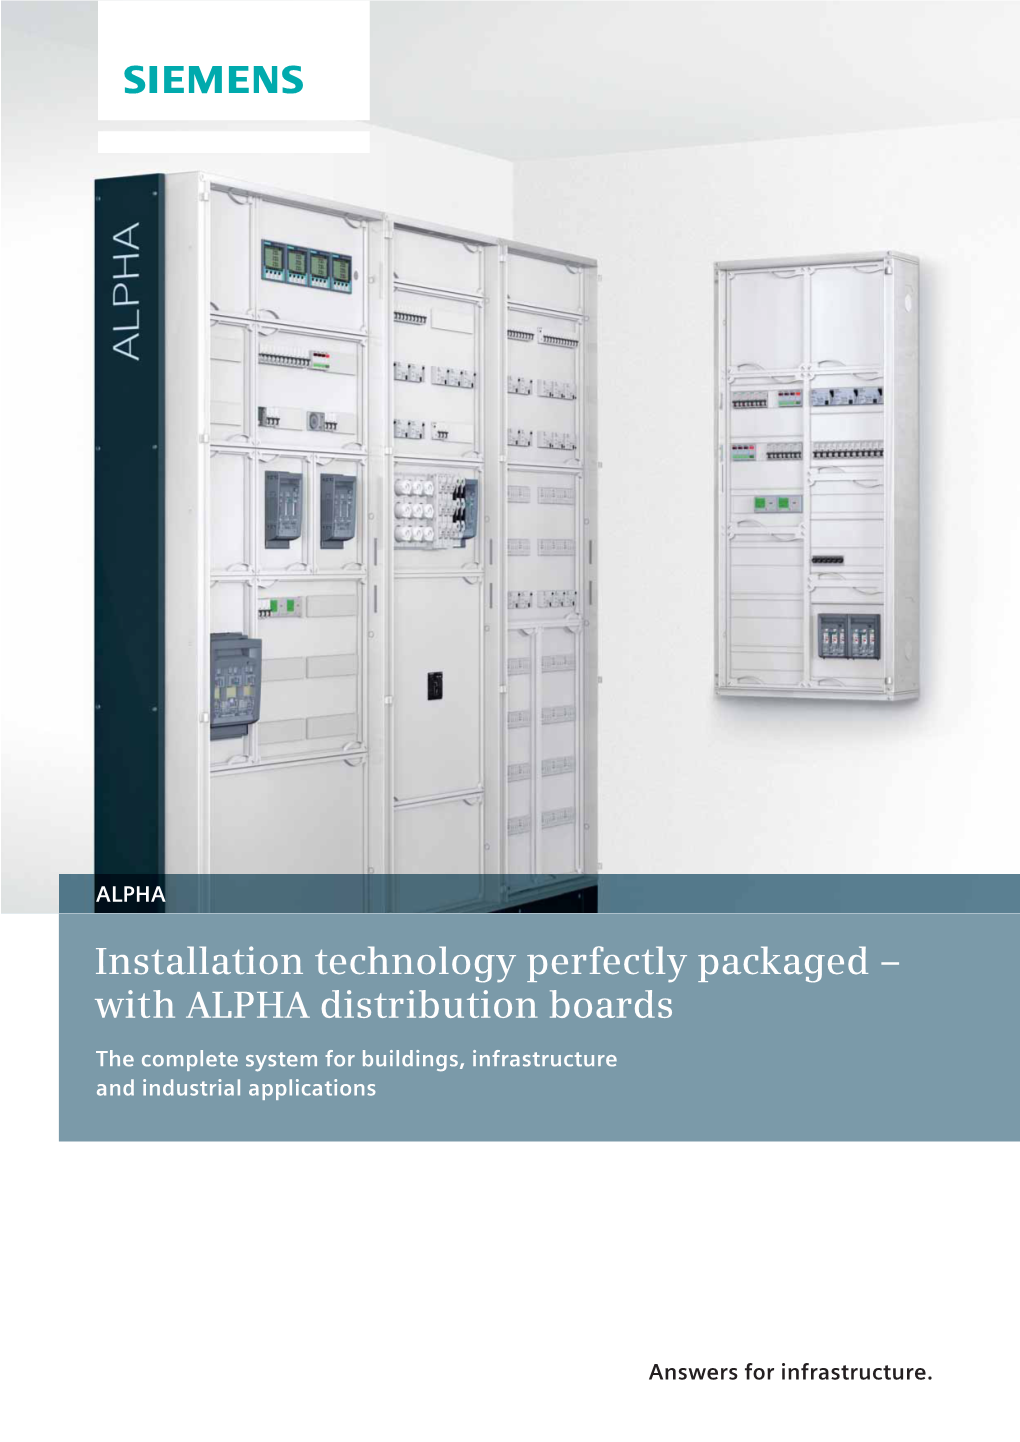 With ALPHA Distribution Boards